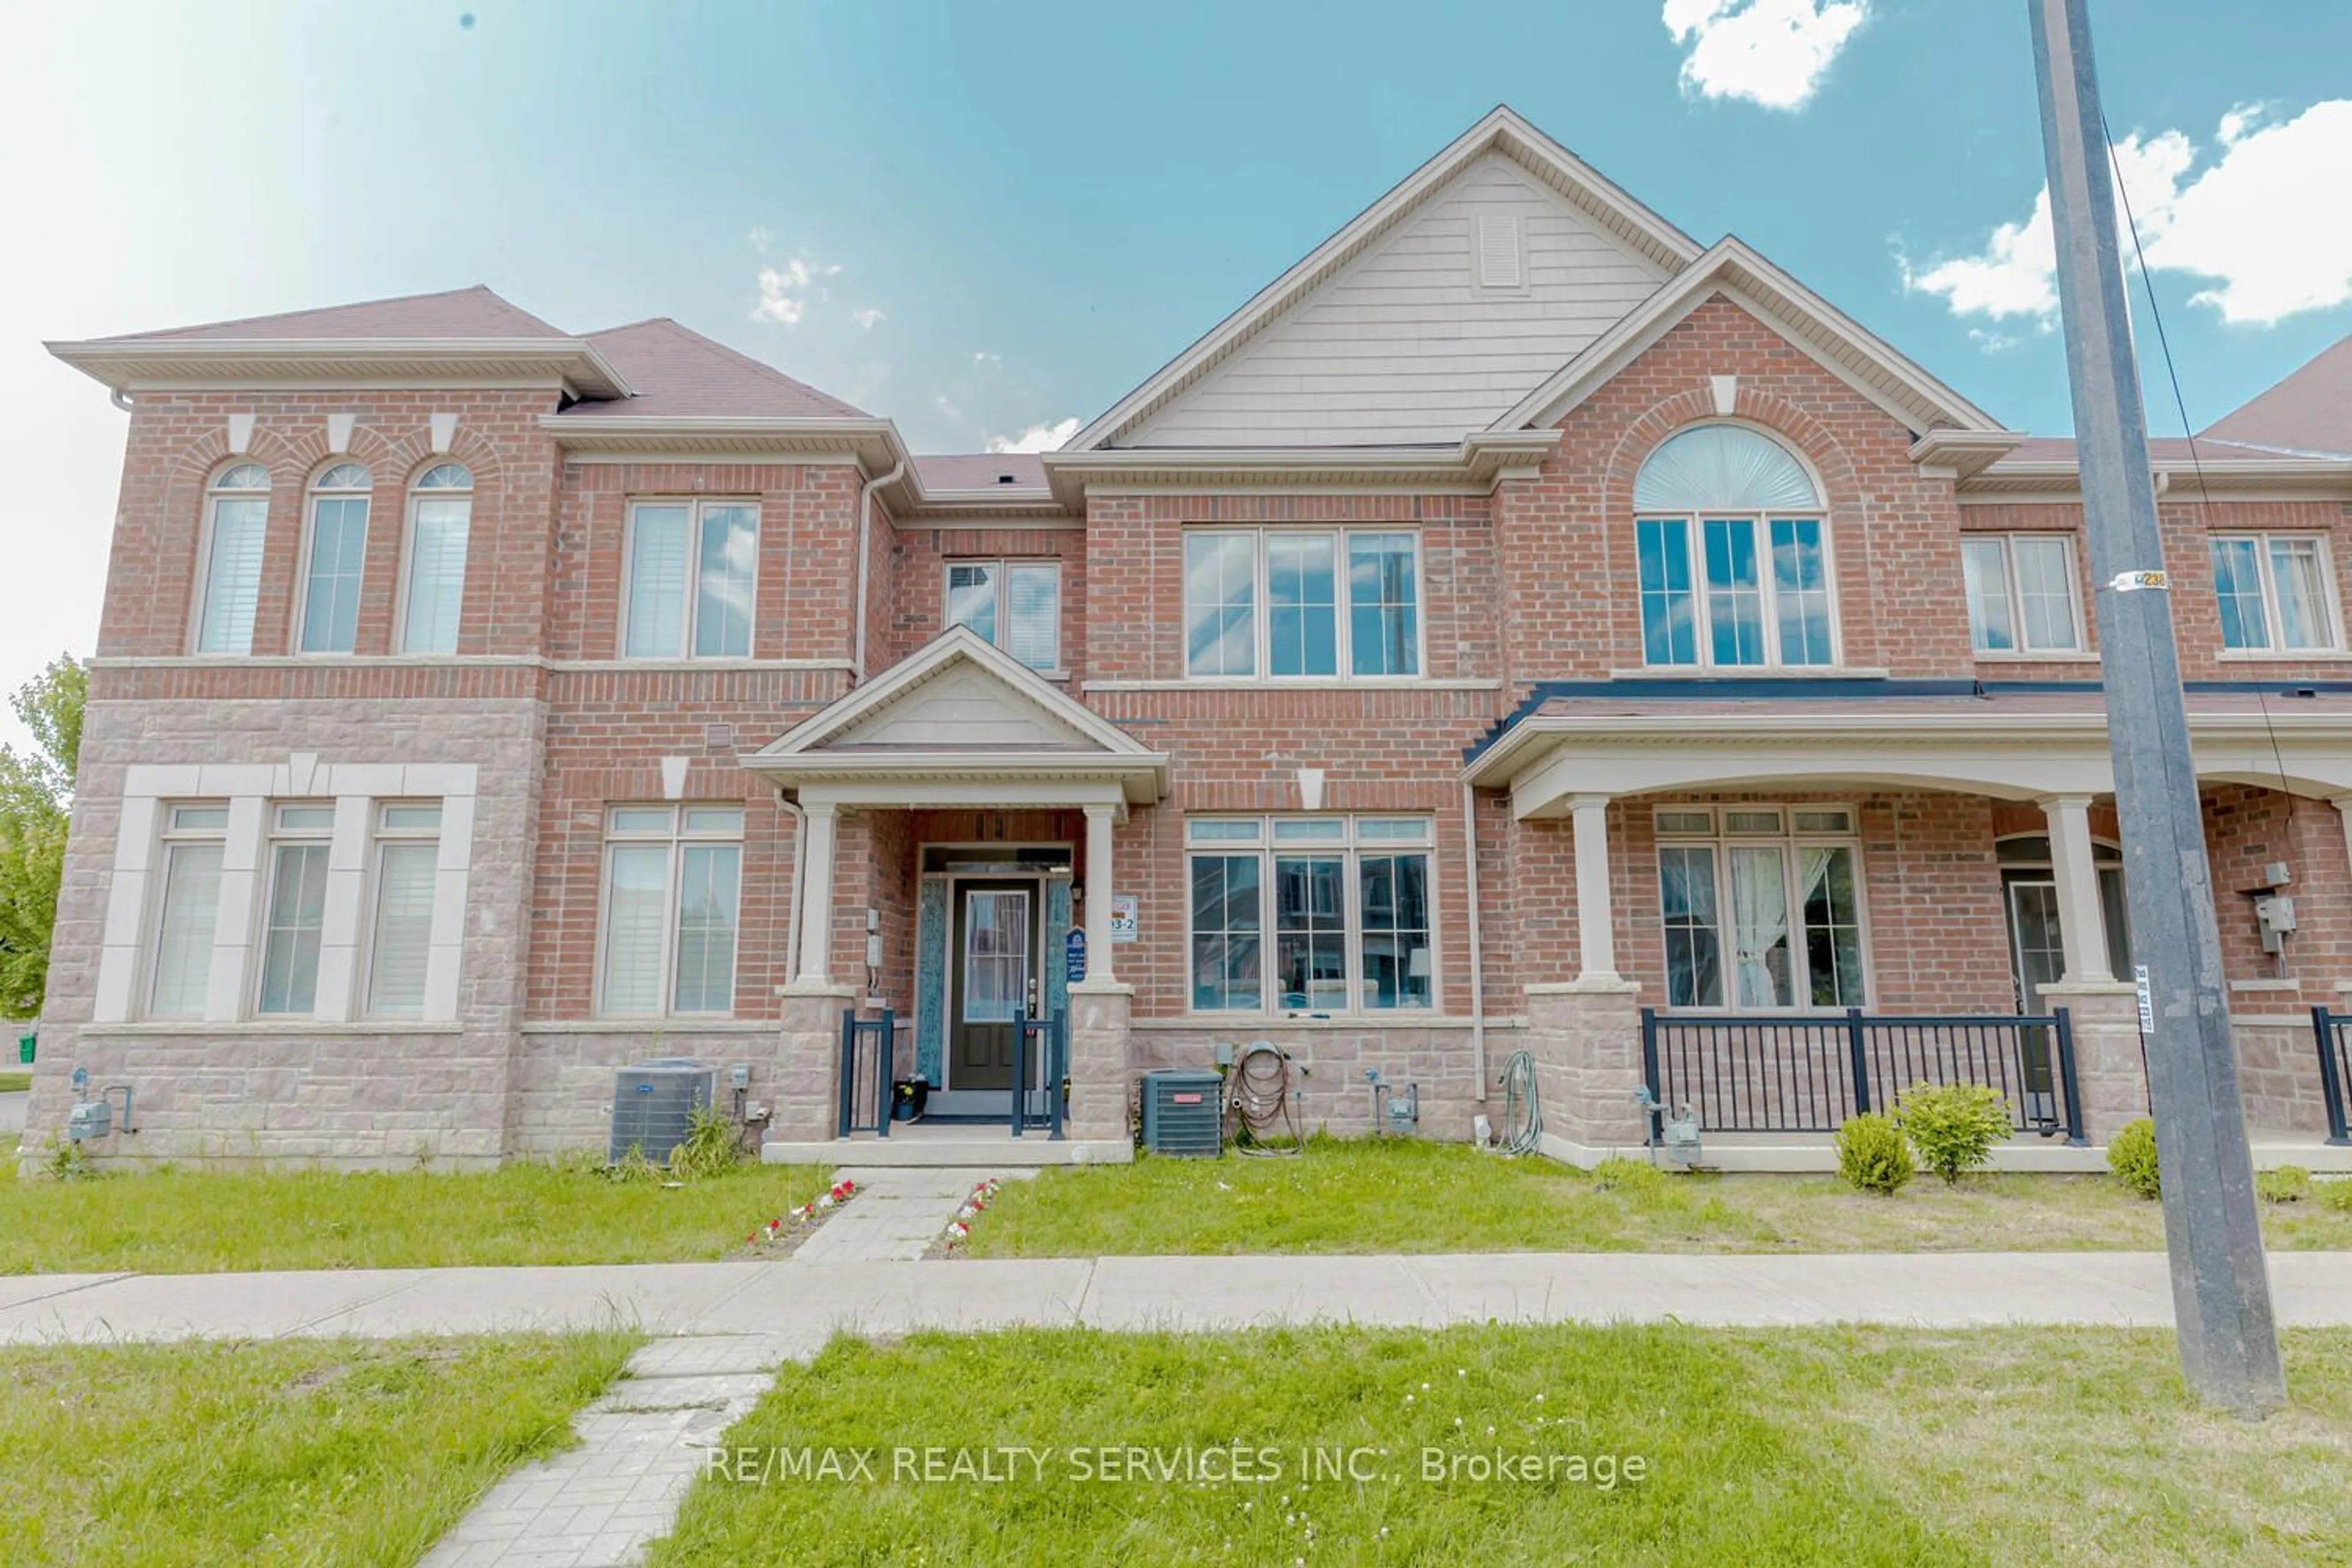 Home with brick exterior material for 238 Inspire Blvd, Brampton Ontario L6R 1X8